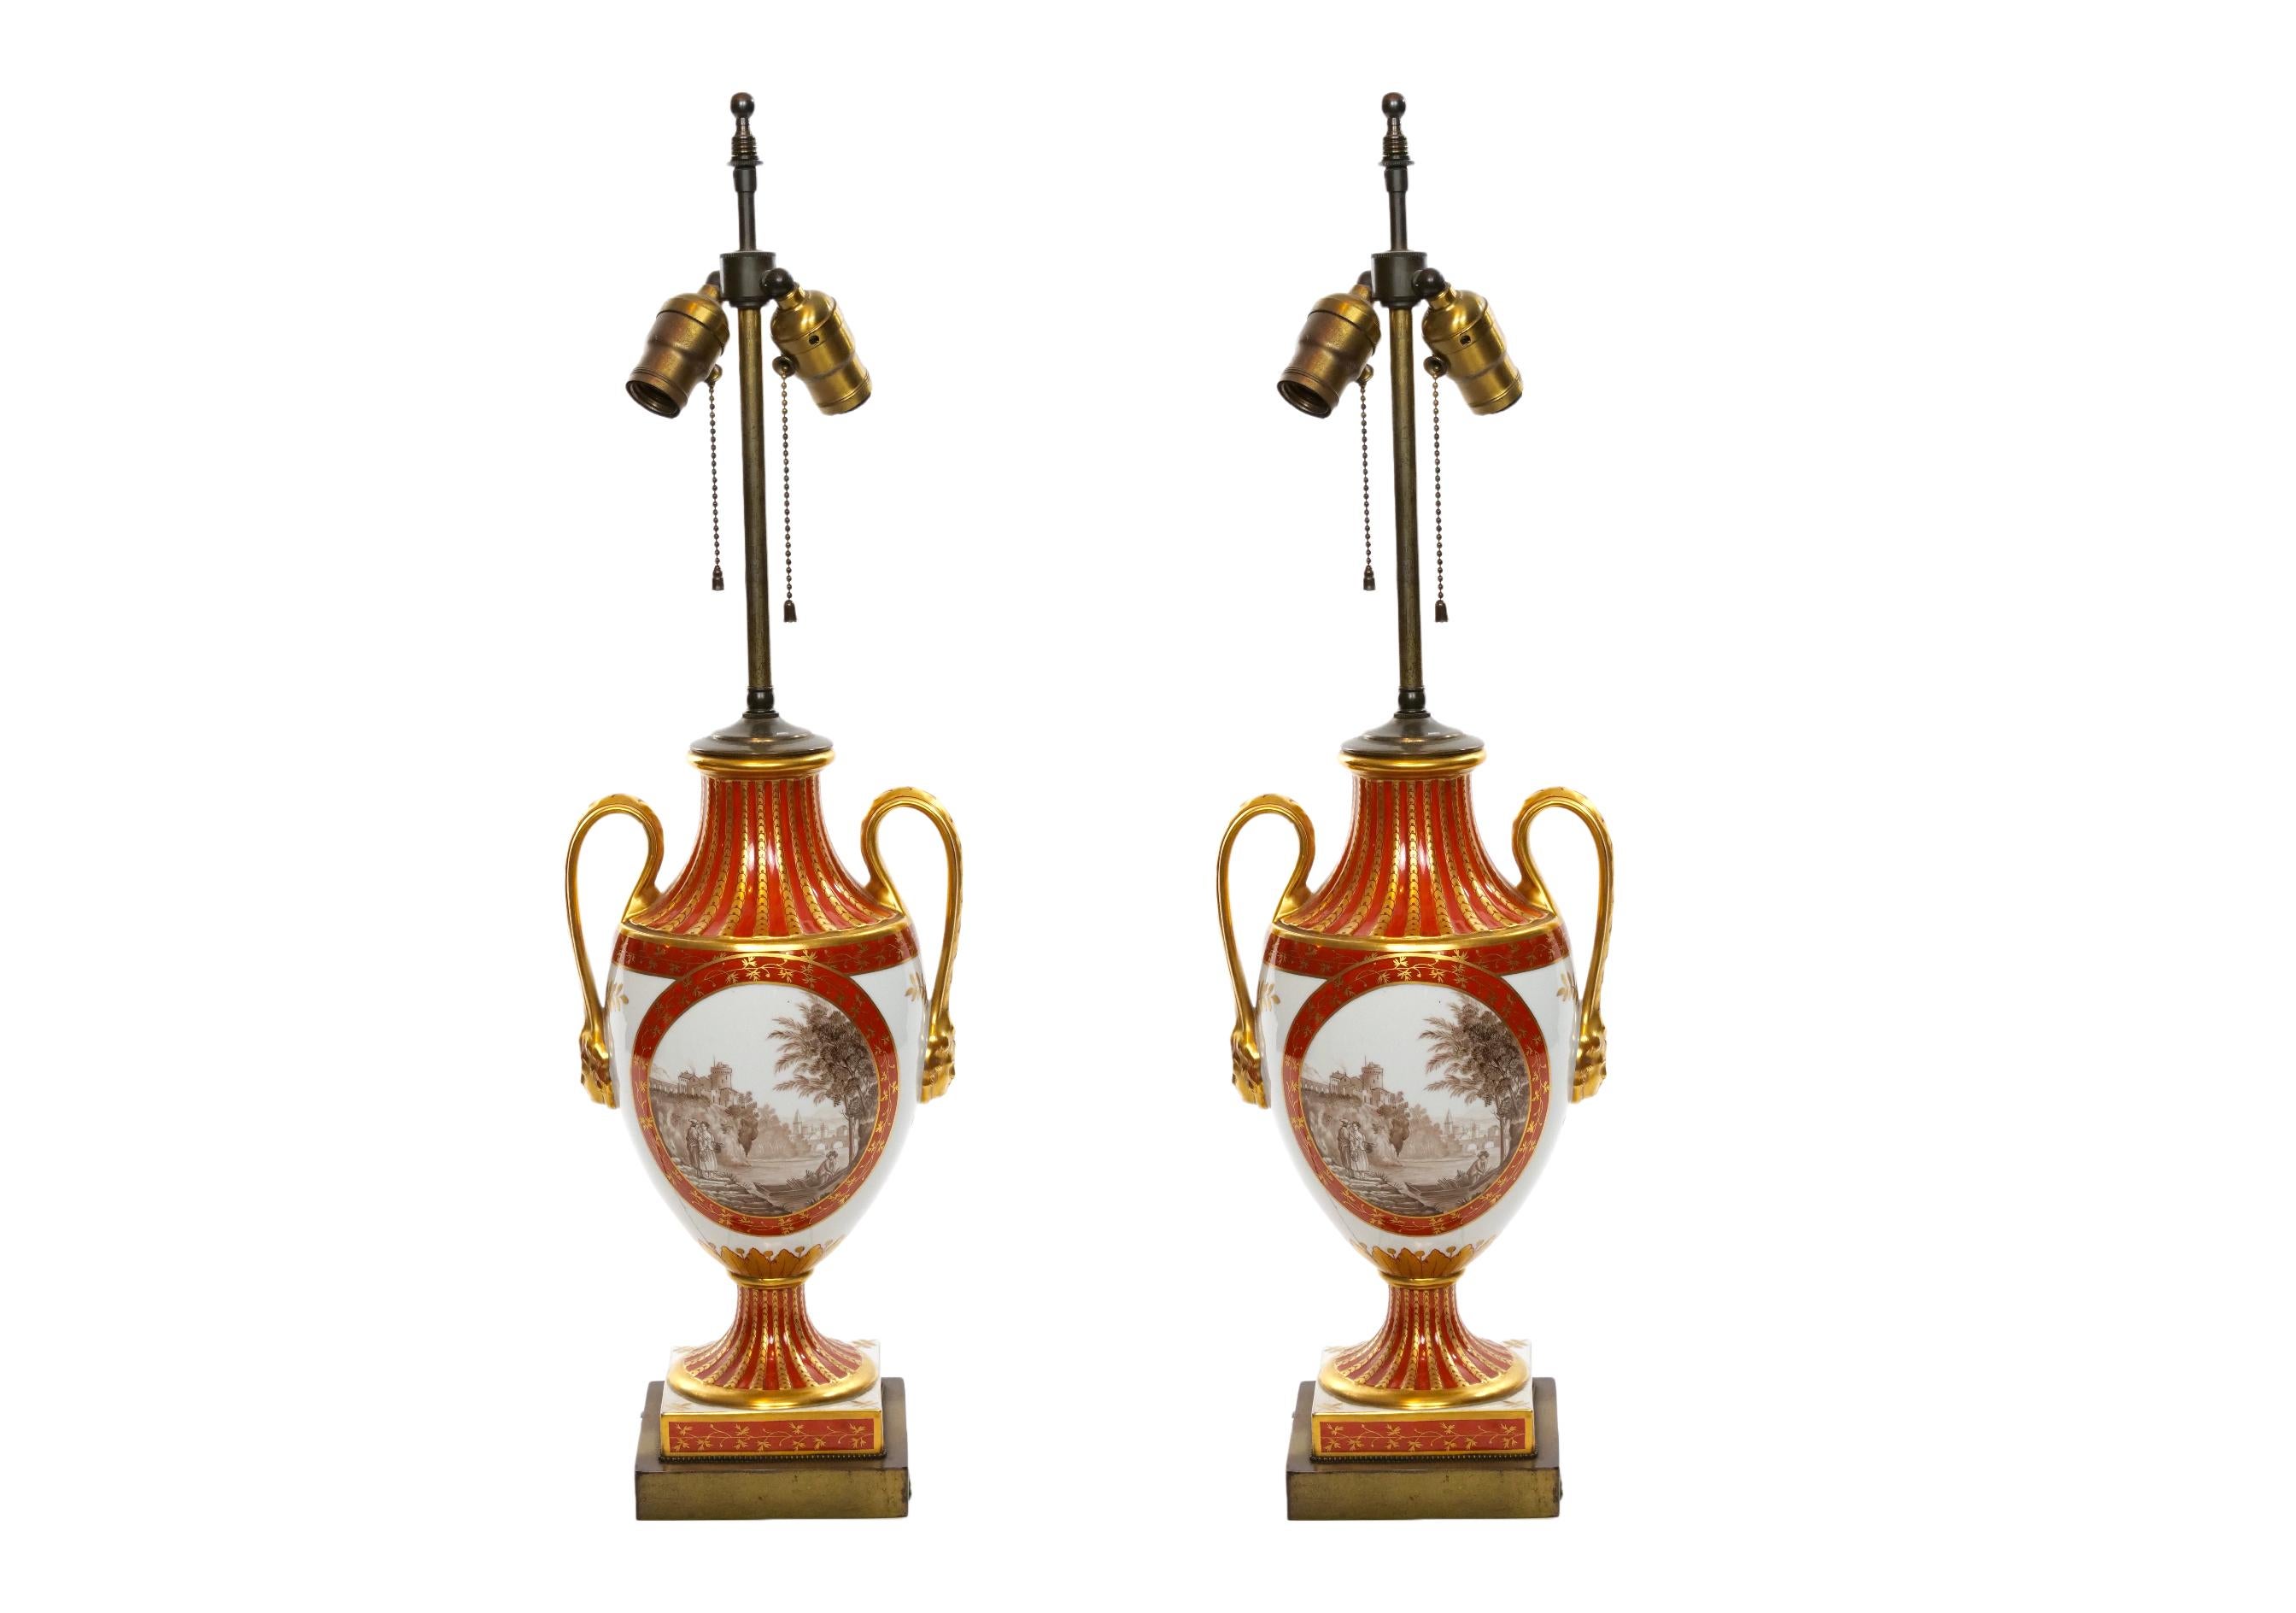 Louis XVI style French porcelain and gilt gold dore decorative vase pair table lamp. Each lamp features on one side a painted pastoral promenade scenes signed by a famous artist in the 19th century. The reverse is painted with a different nature